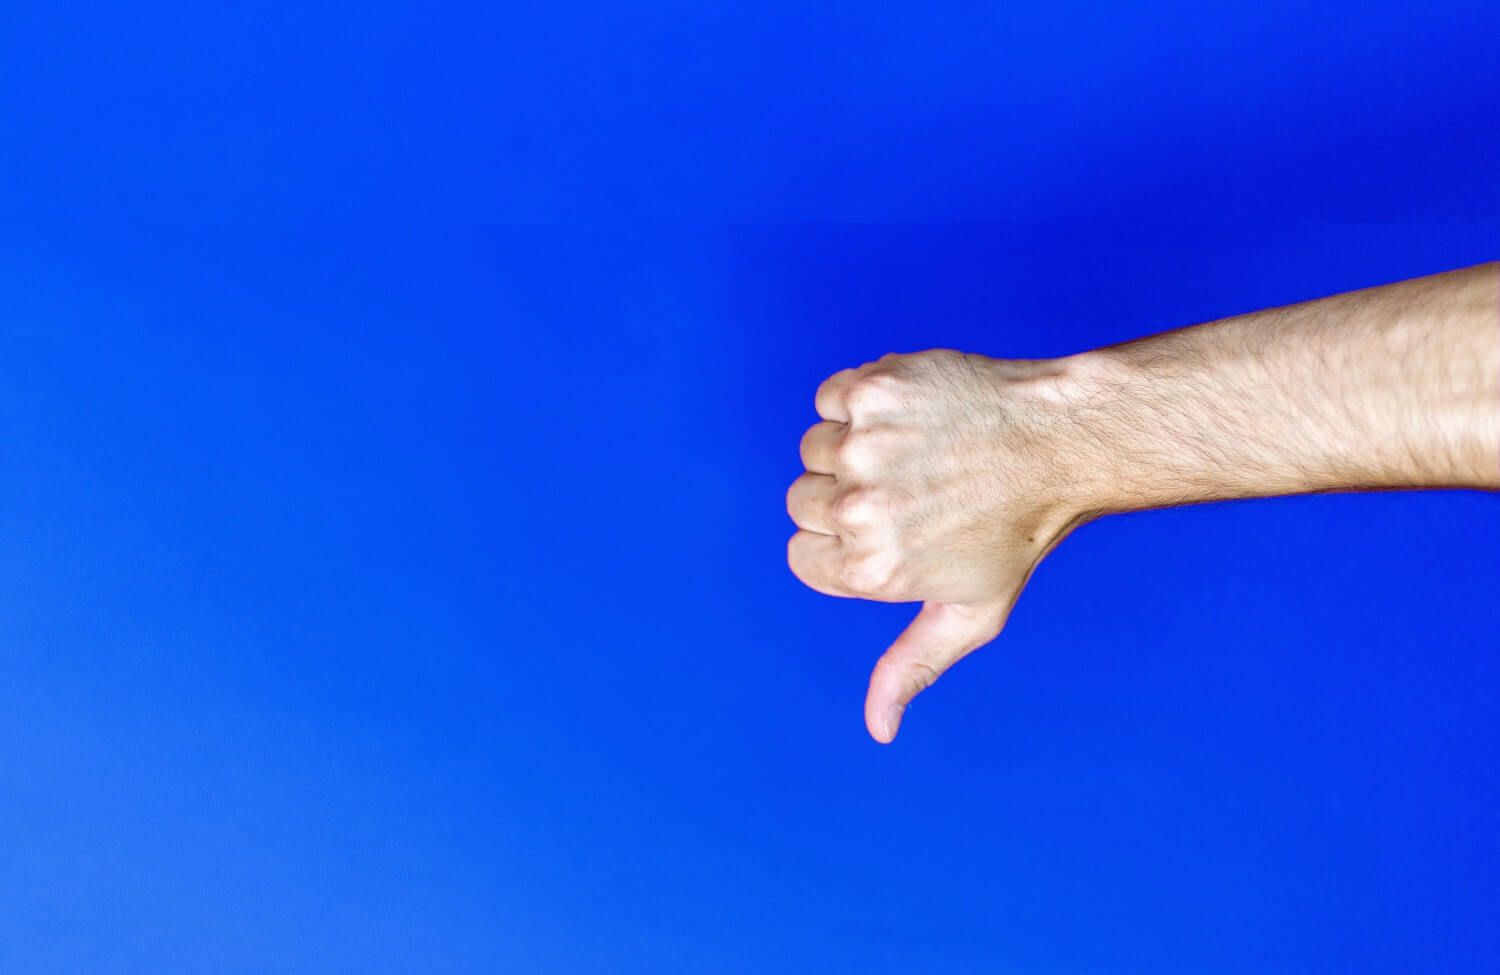 Male arm making thumbs down gesture against a dark blue background